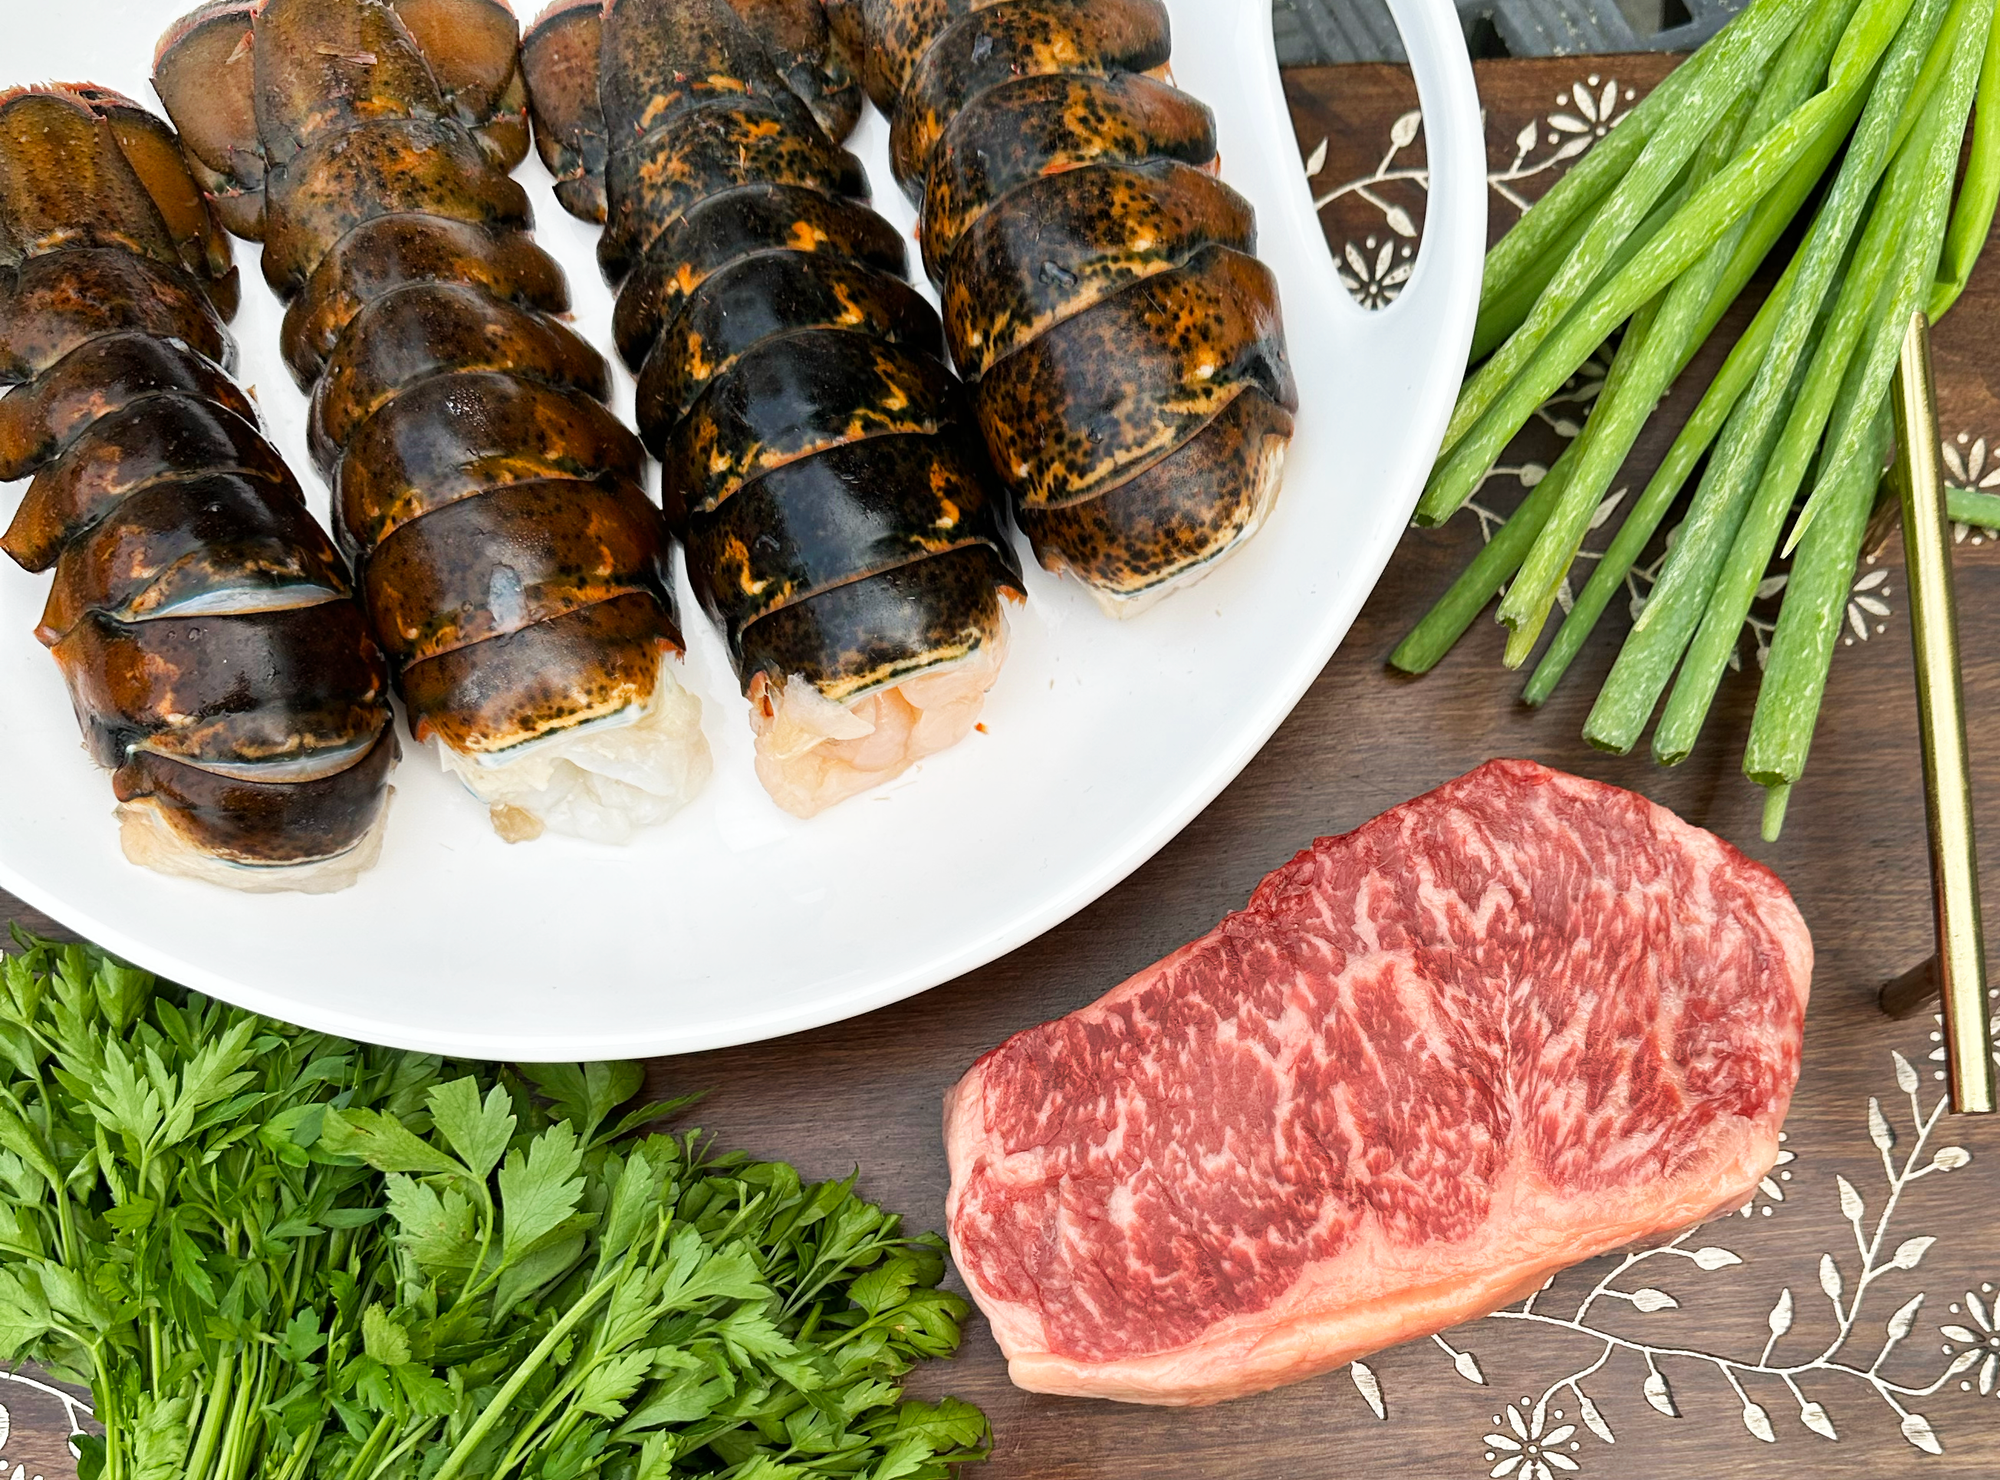 Surf 'N Turf - NY Strip and Maine Lobster Tails